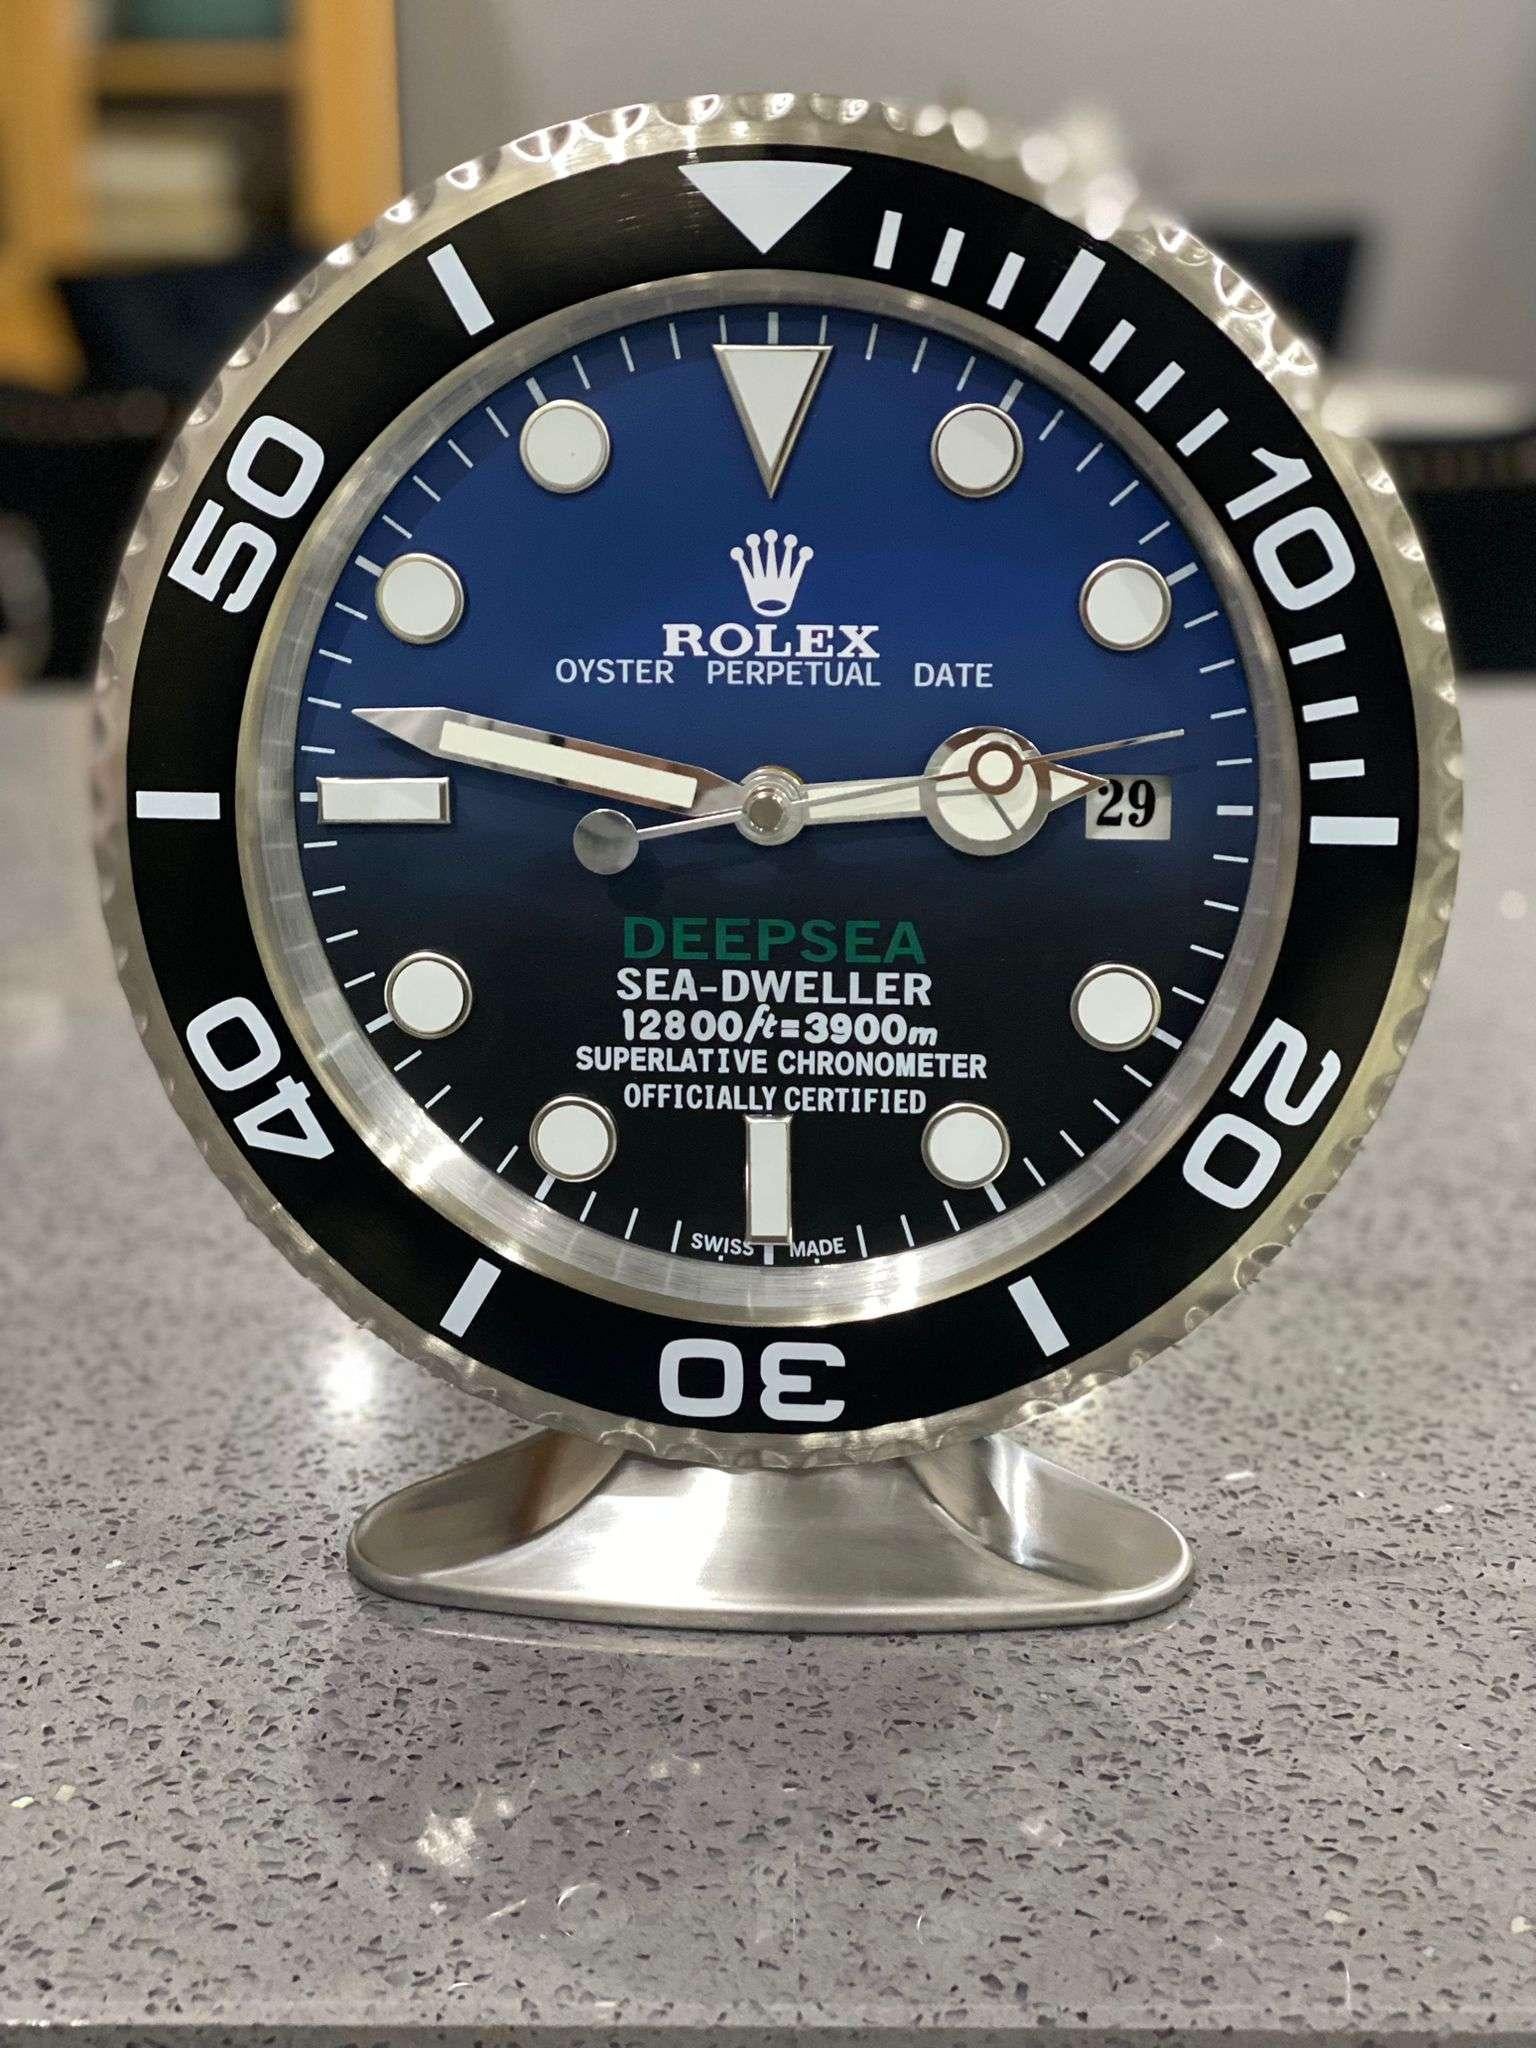 ROLEX Officially Certified Oyster Perpetual Black Deepsea Dweller Desk Clock 
Luminous hands.
Fully functional date.
Sweeping hands.
Quartz movement.
Good condition, working.
Free international shipping.